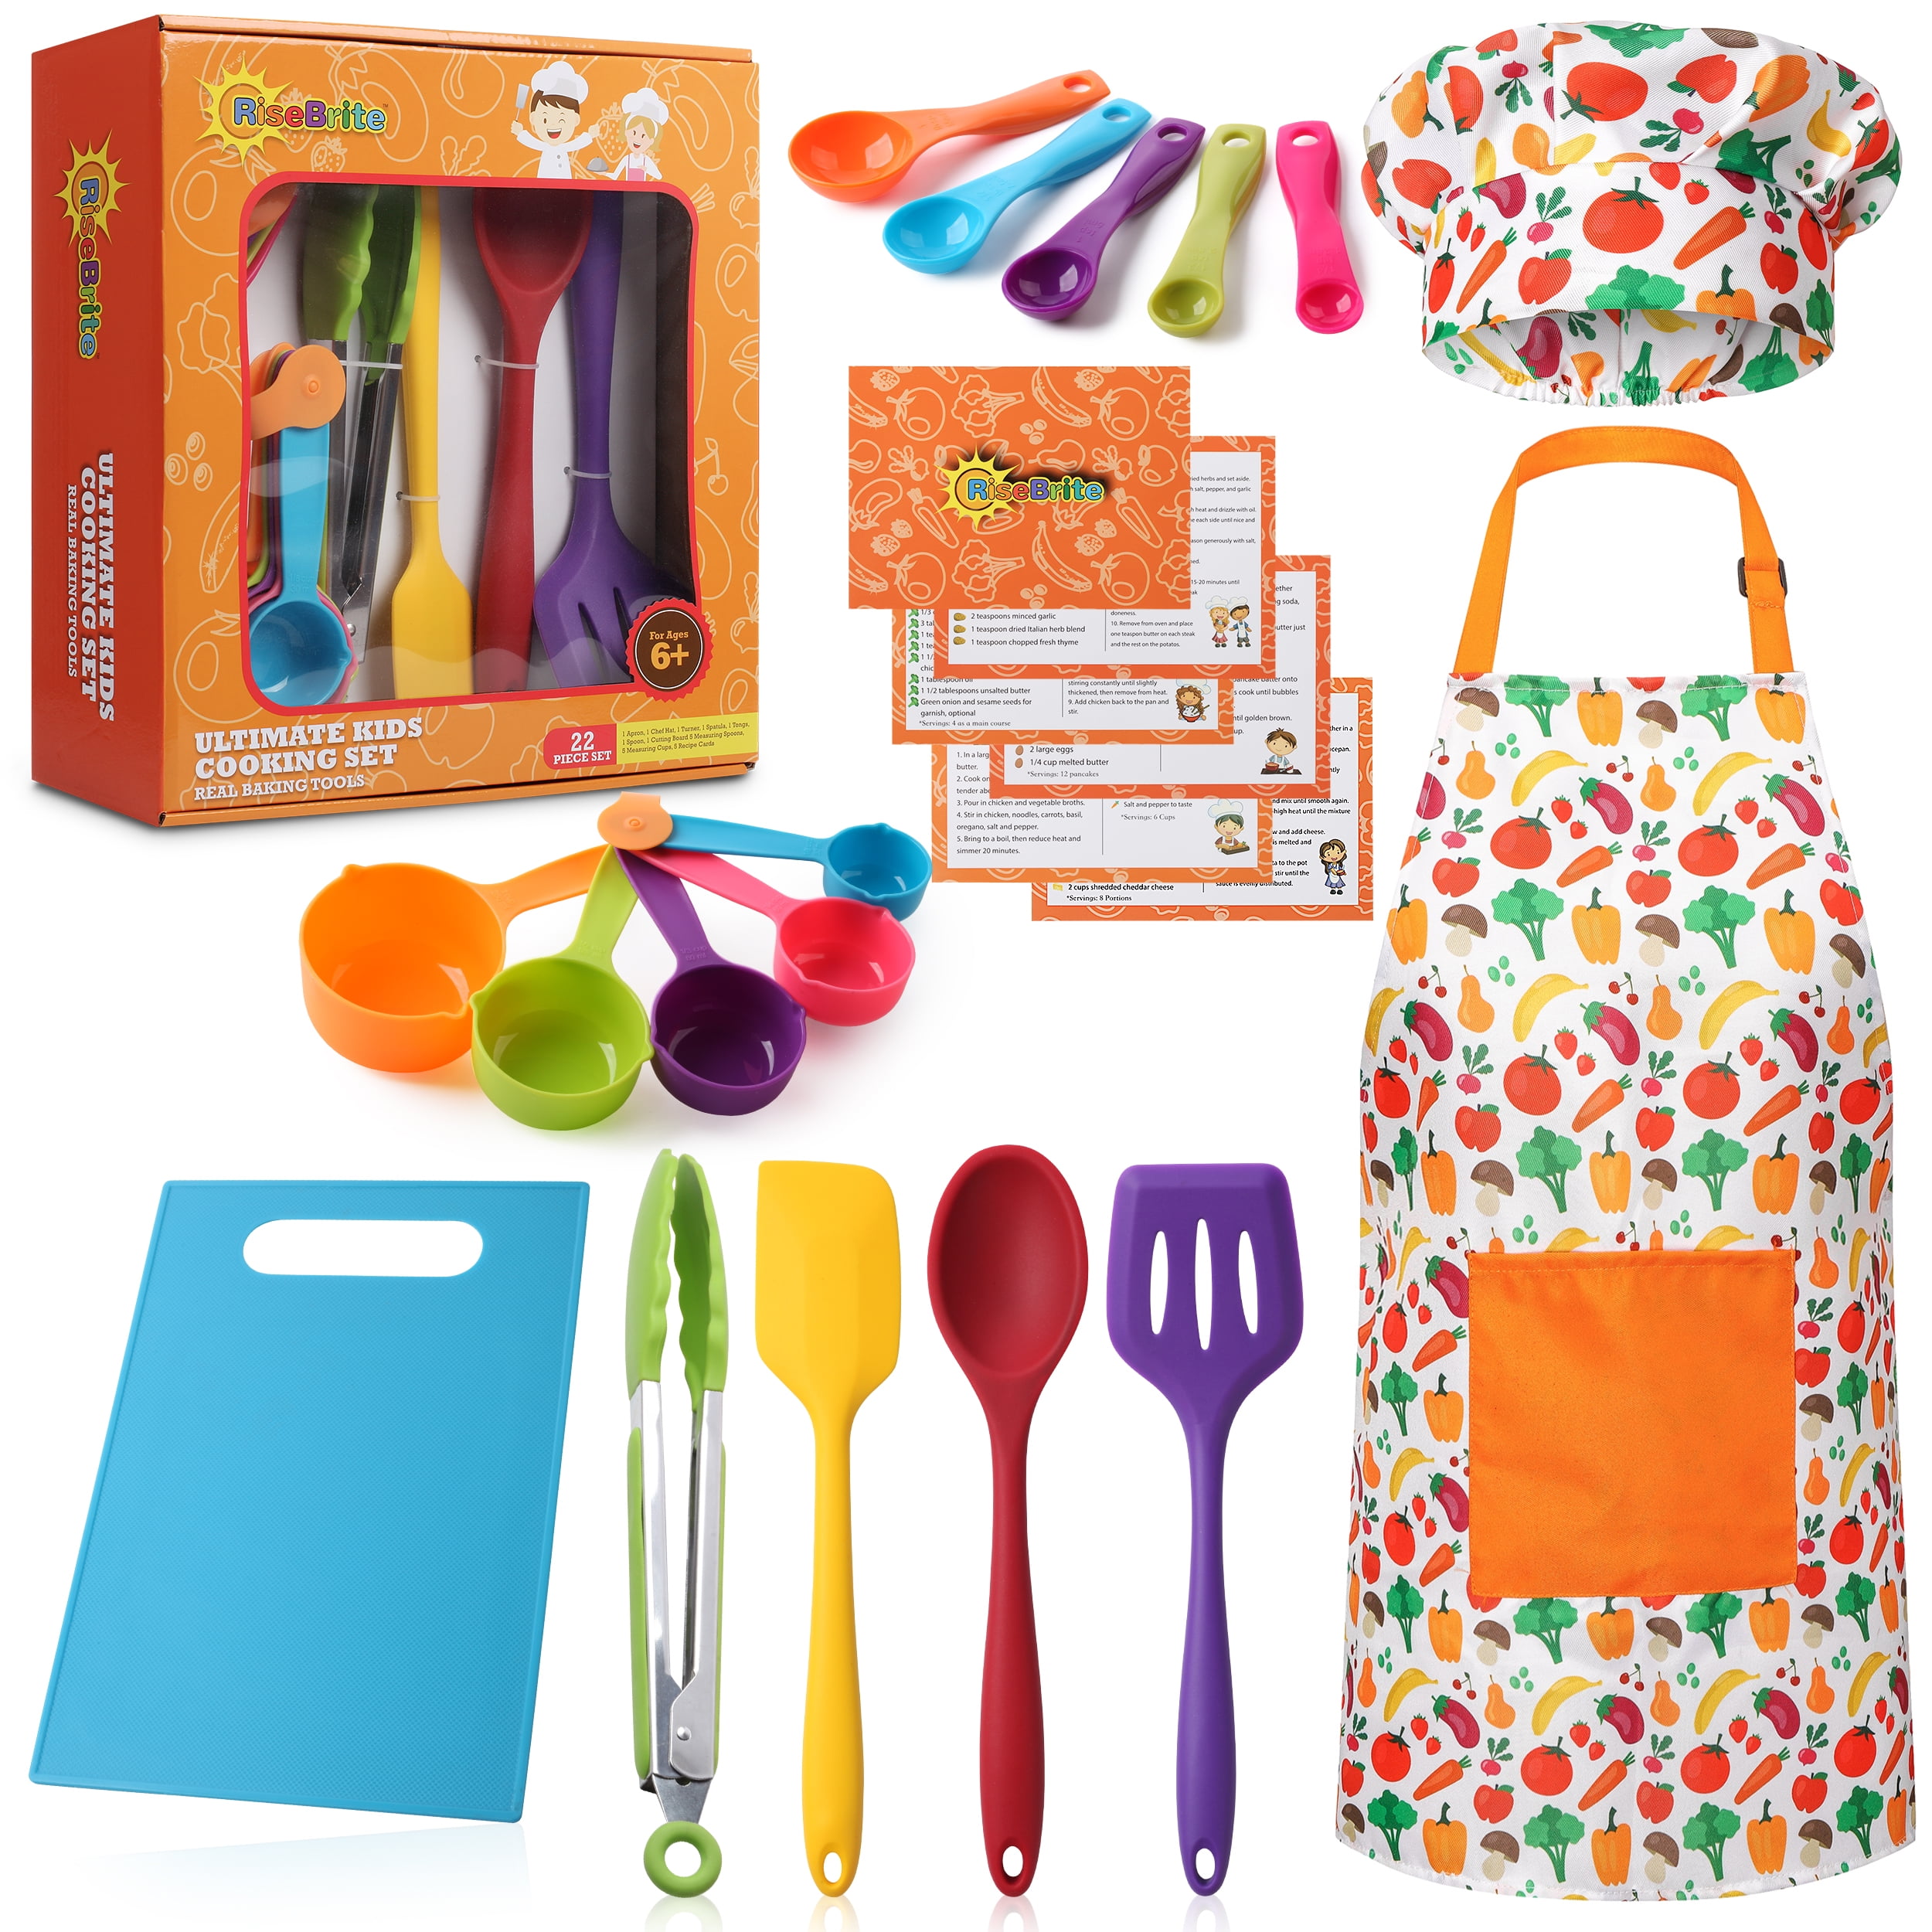 Painting and More RISEBRITE Kids Apron and Chef Hat Set for Girls and Boys for Cooking Gardening Baking 